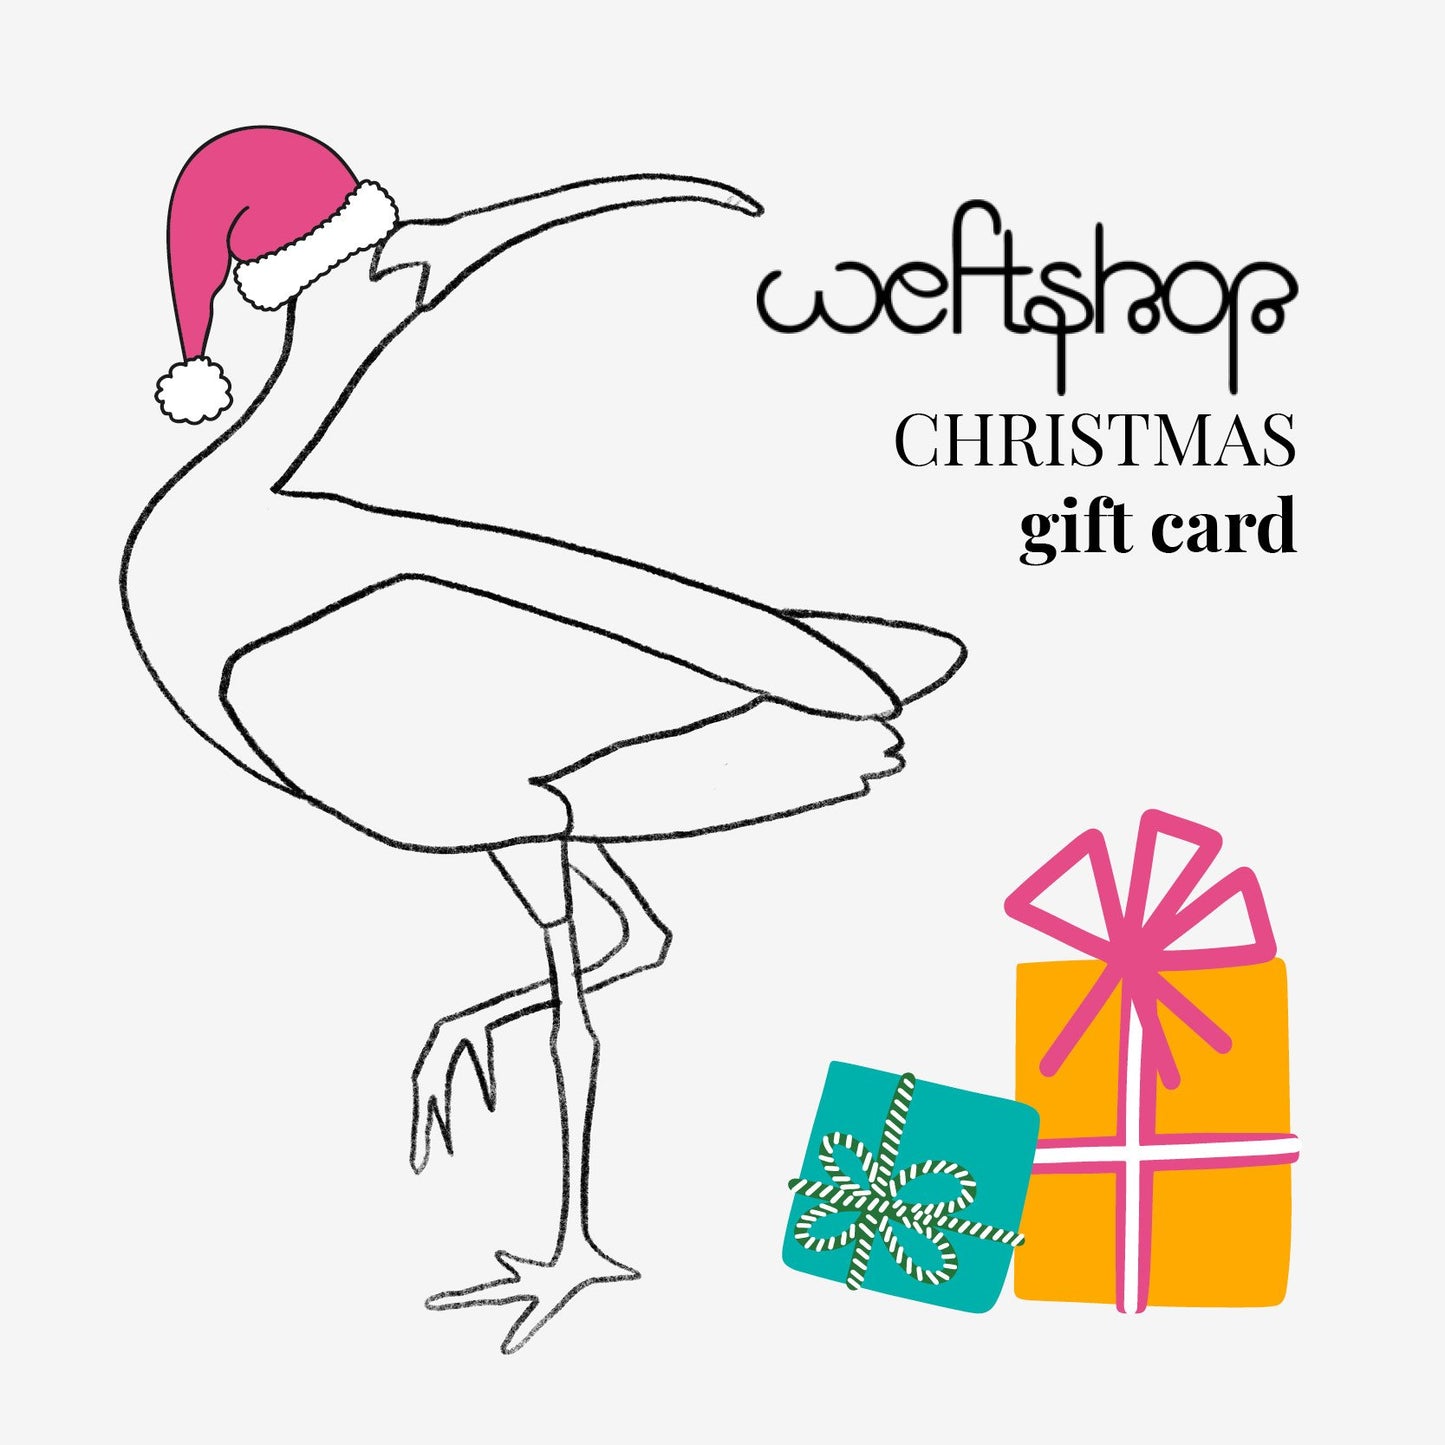 Christmas Gift Card Gift Card WEFTshop 